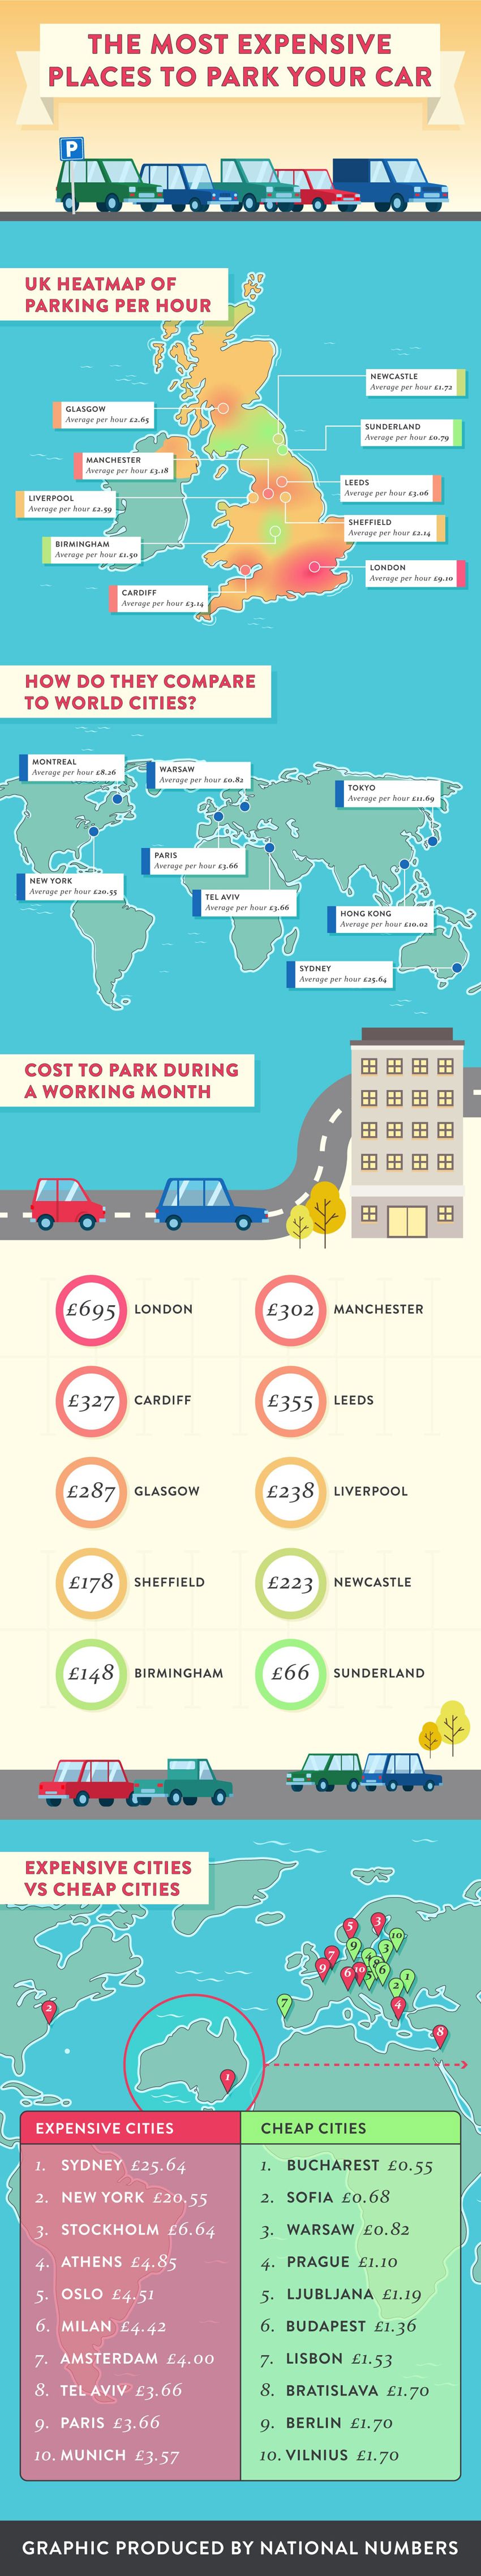 Top 10 most expensive places to park per hour in the UK vs the world revealed